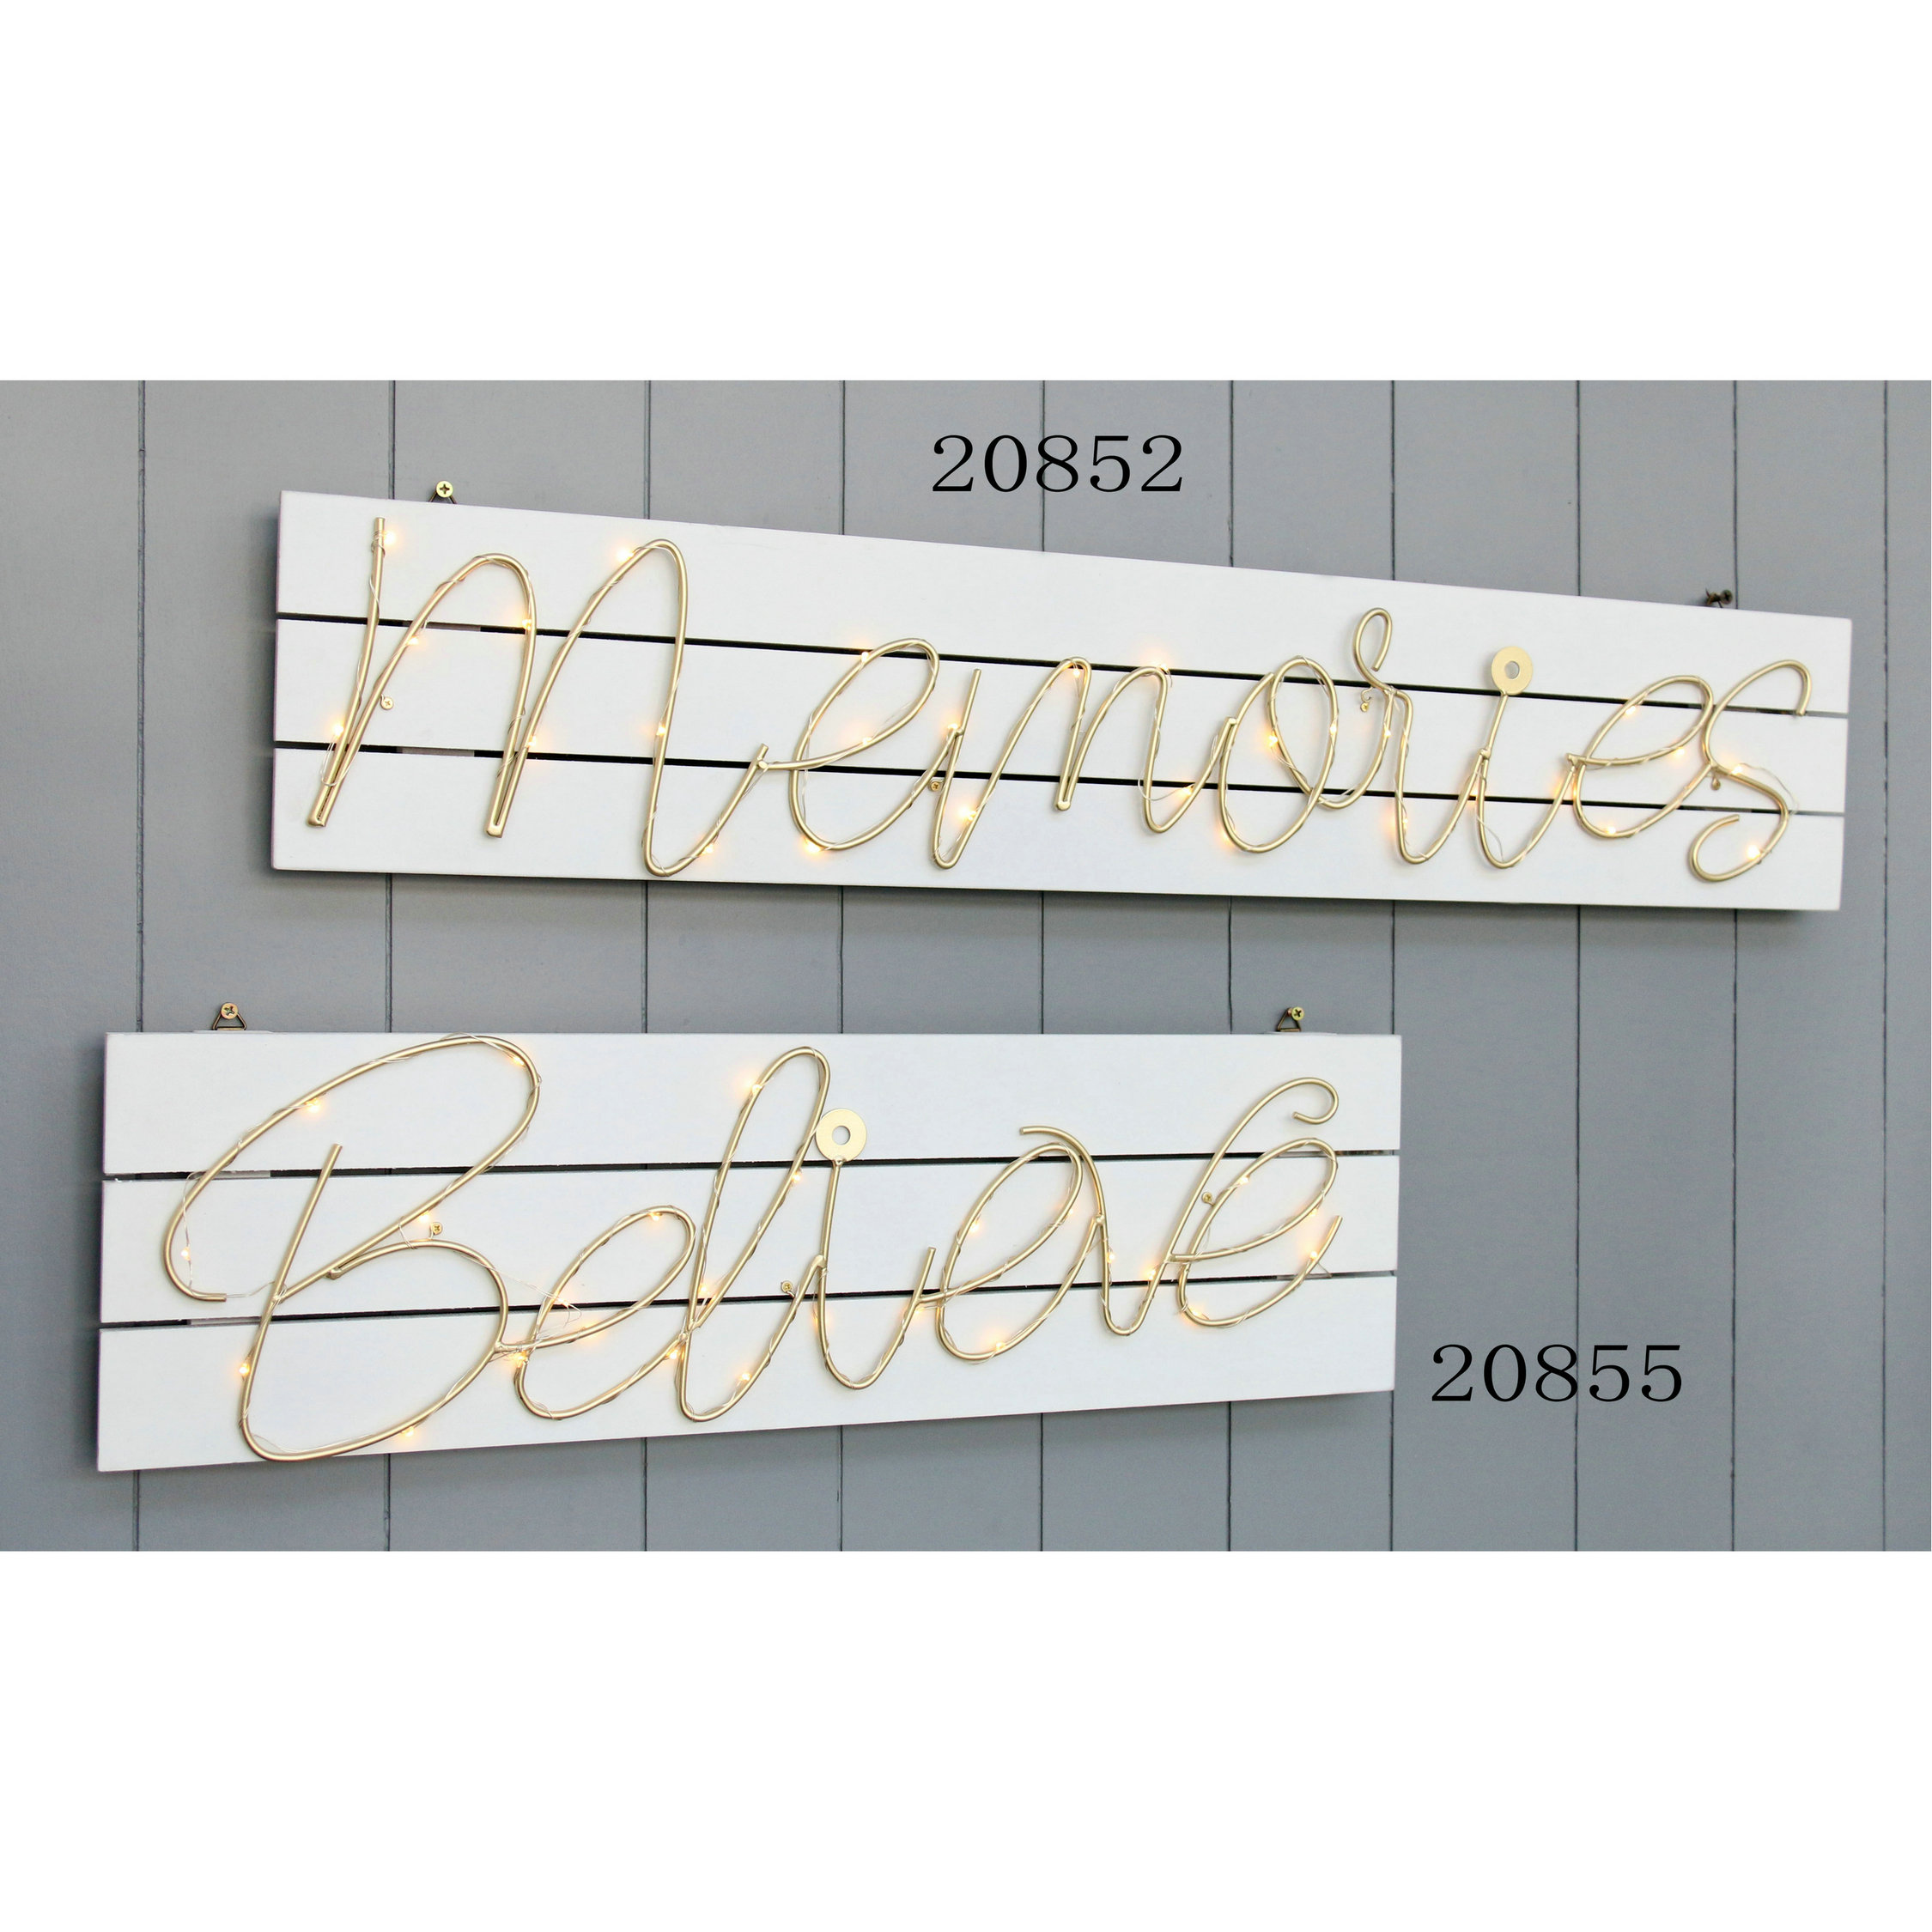 FU-20852  Wood plaque with wire MEMORIES LED  80.5X15.3CM